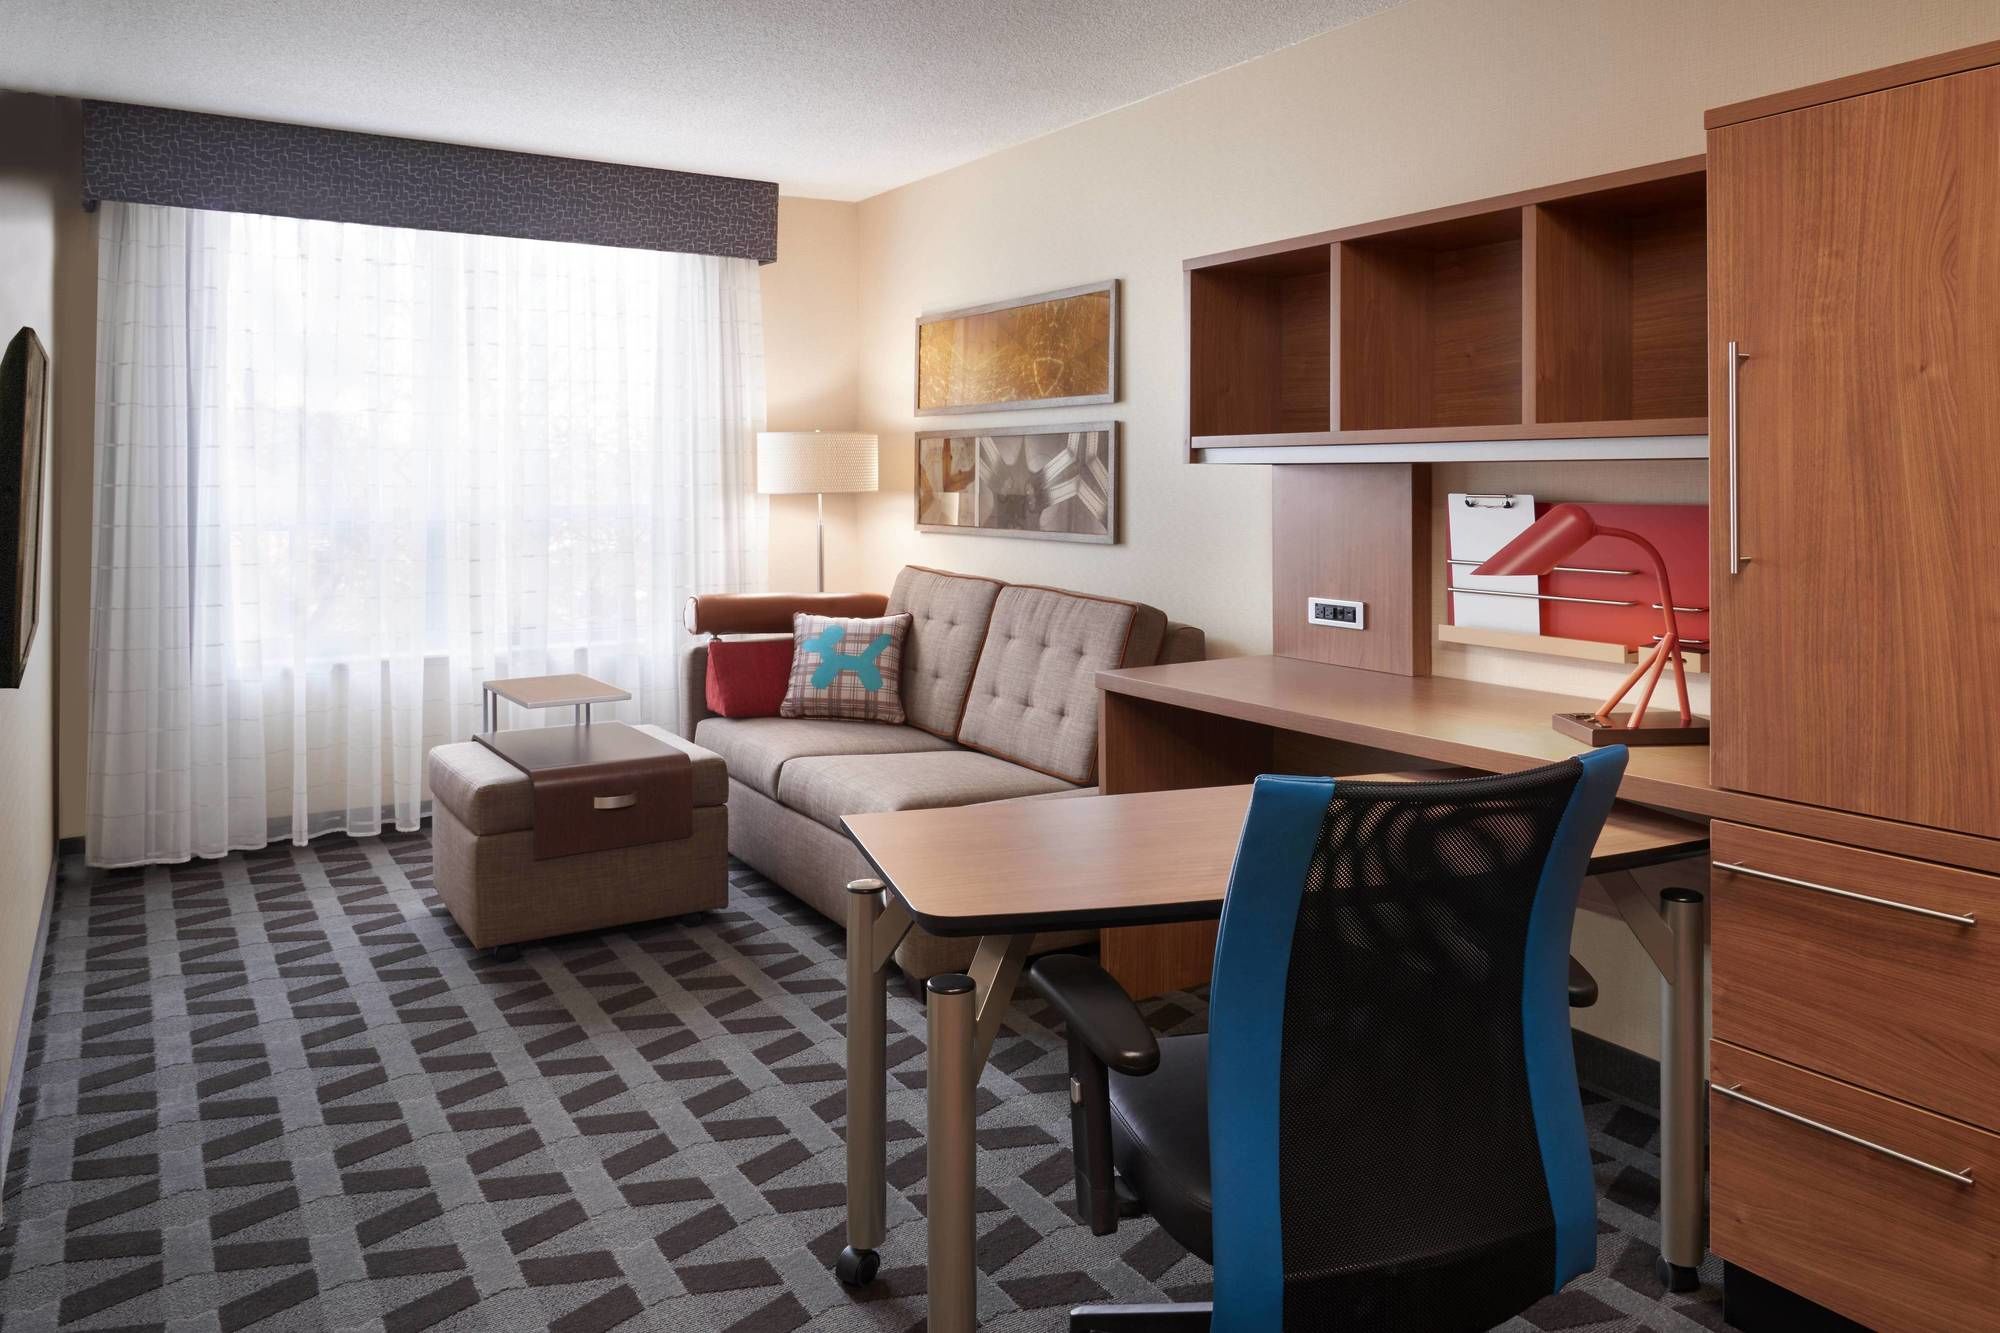 TownePlace Suites Windsor